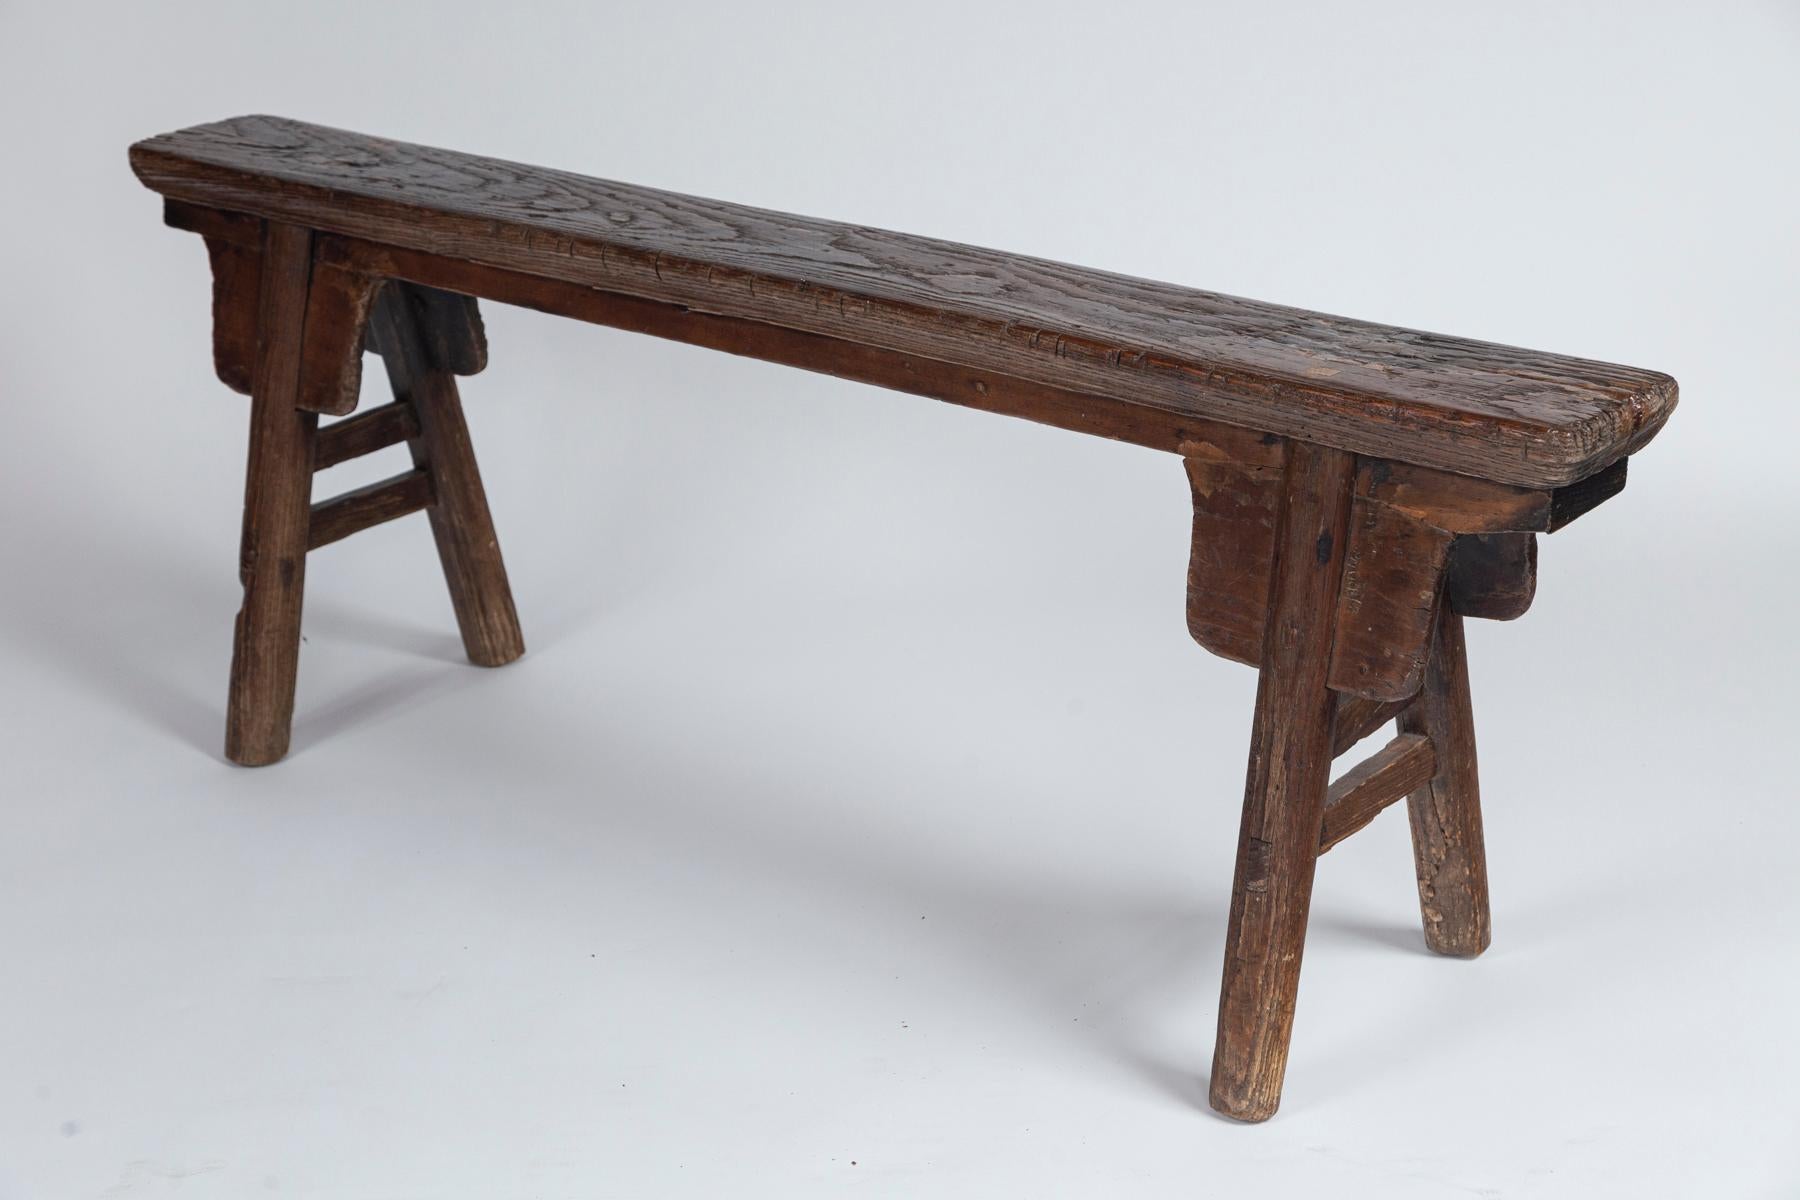 Rustic Chinese bench, 20th century. Provincial two-seat bench, hand-crafted. Aged patina.